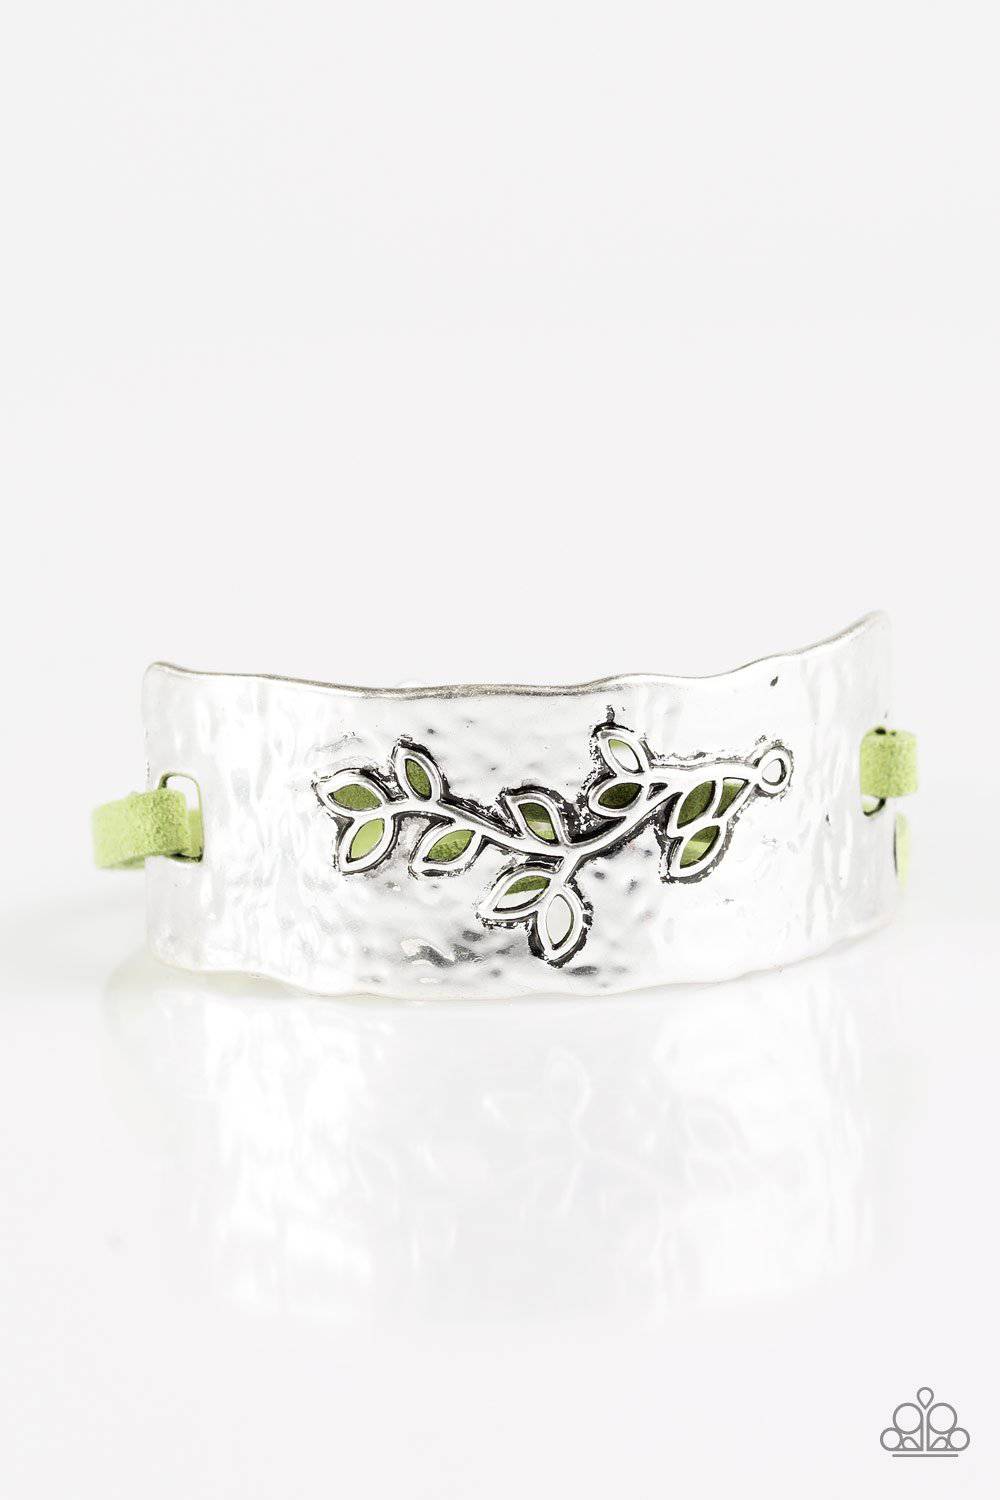 B88 - Branching out Green Bracelet by Paparazzi Accessories on Fancy5Fashion.com